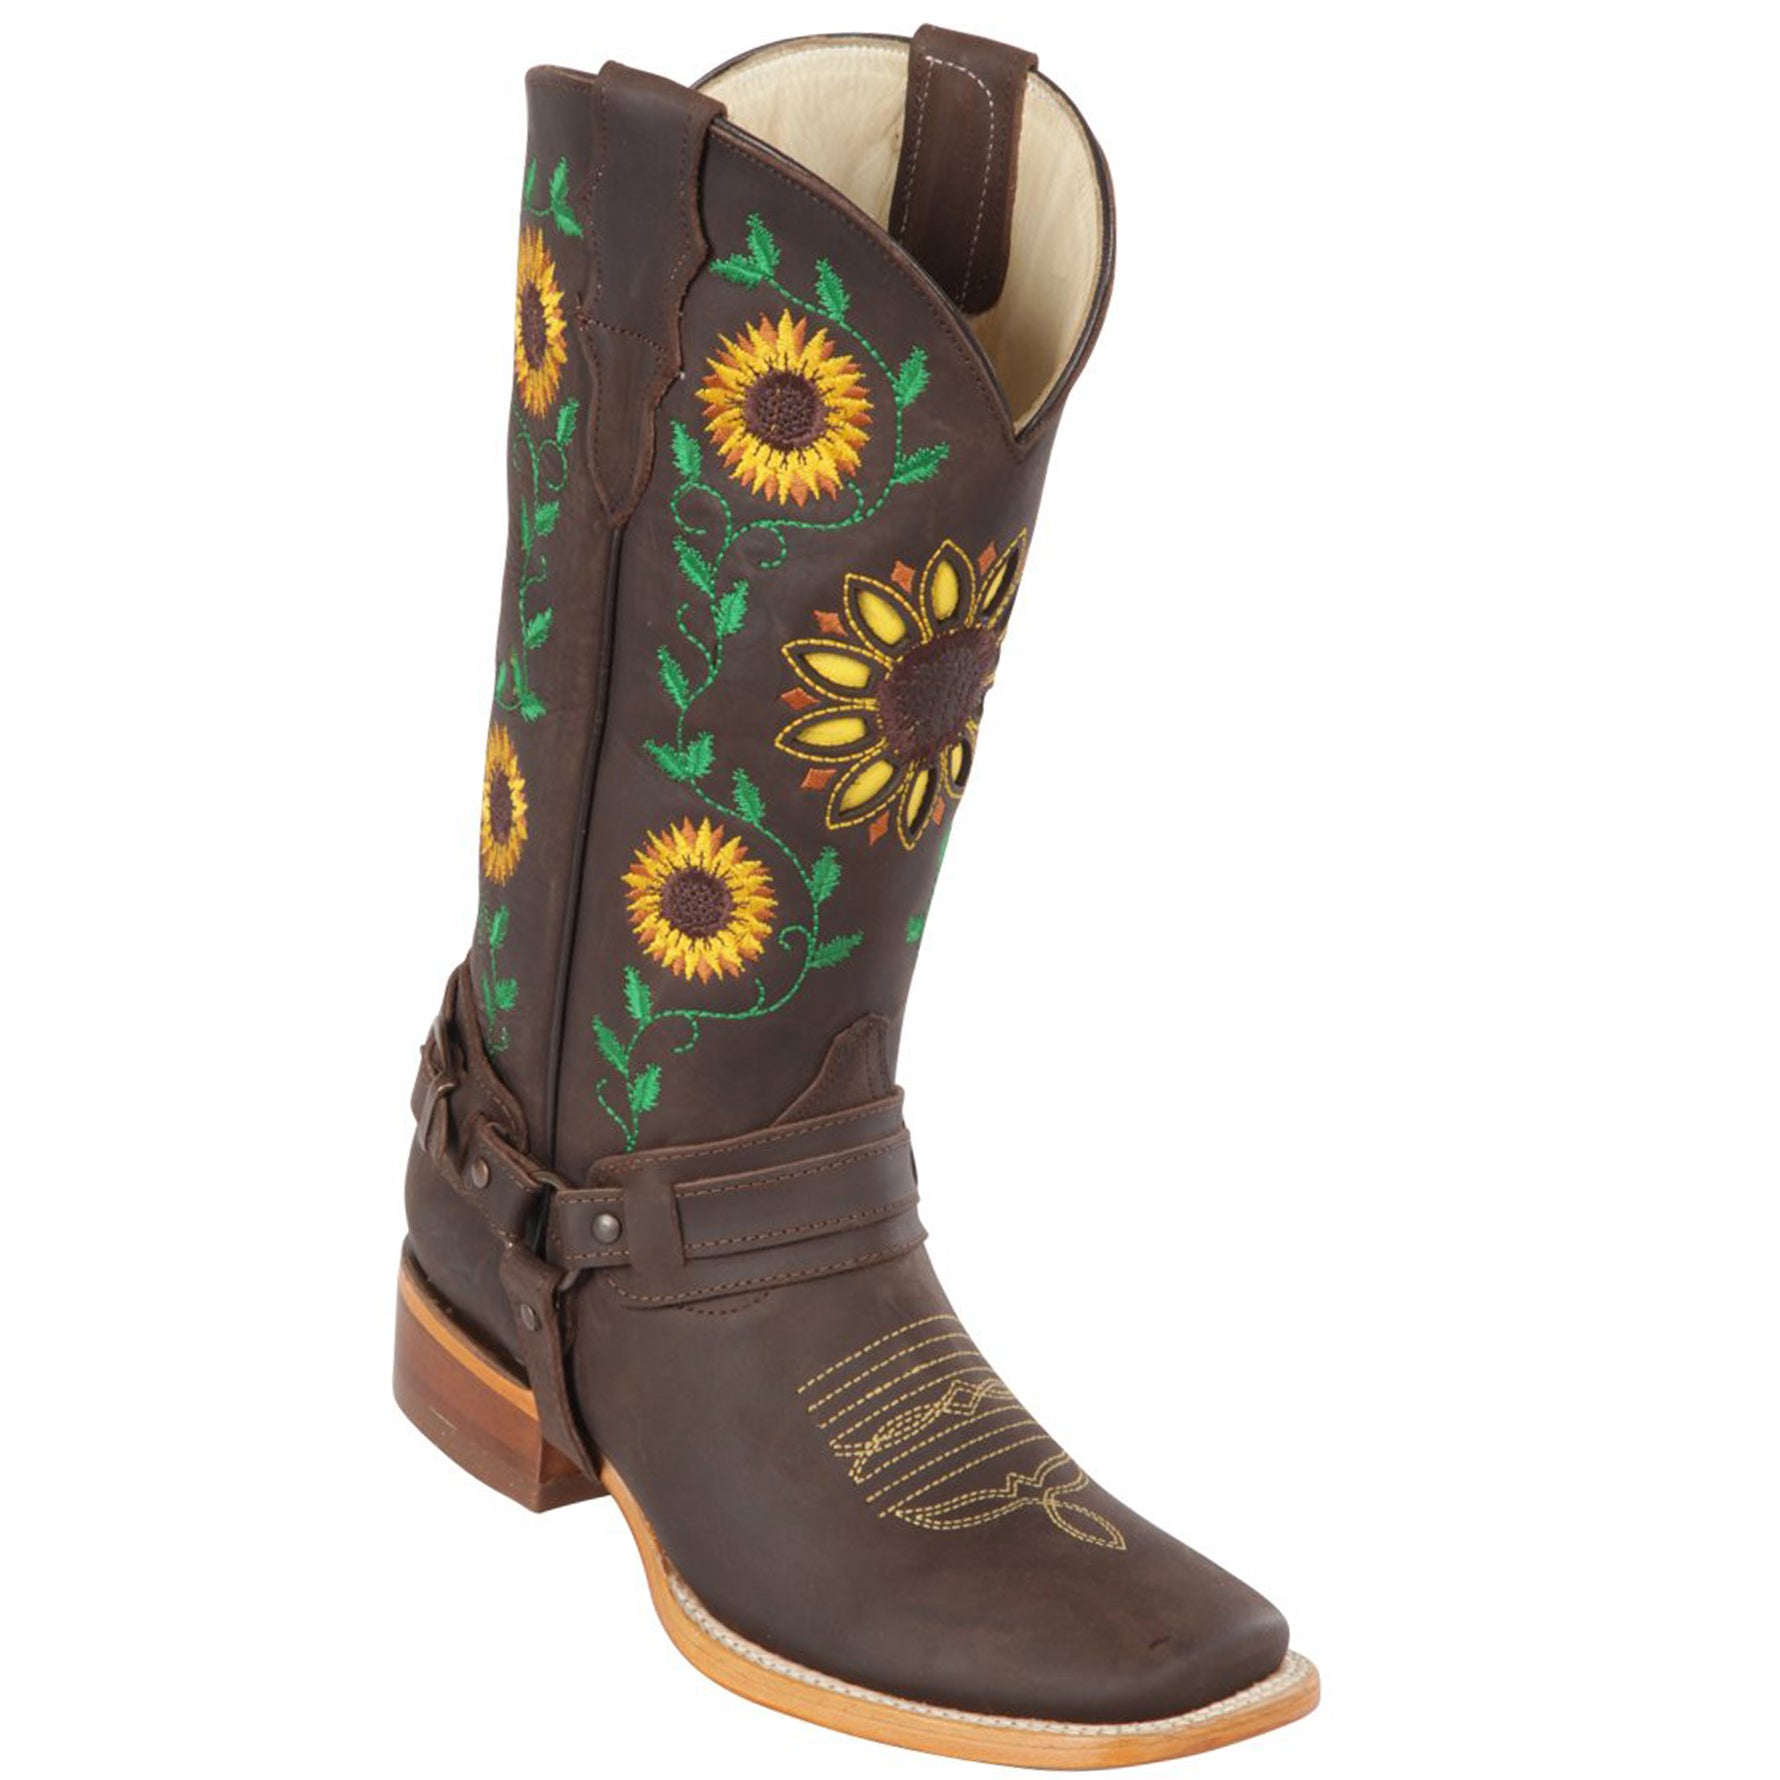 Chocolate Square Toe Sunflower Boots